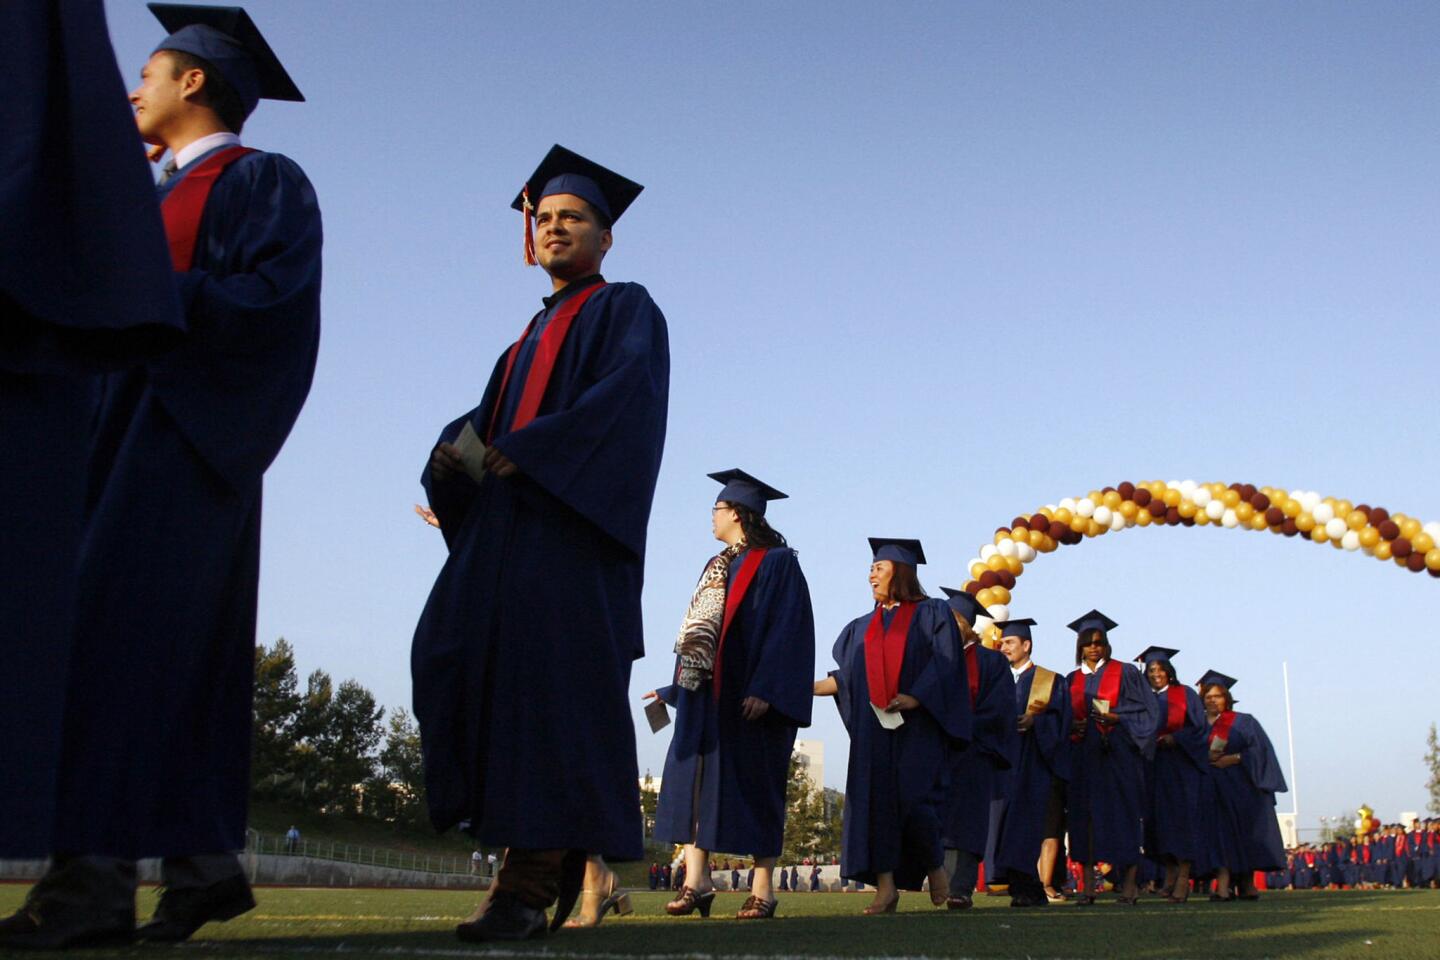 PCC's graduates march into the stadium during their 87th Annual Commencement, which took place at the Robinson Stadium in Pasadena on Friday, June 15, 2012.